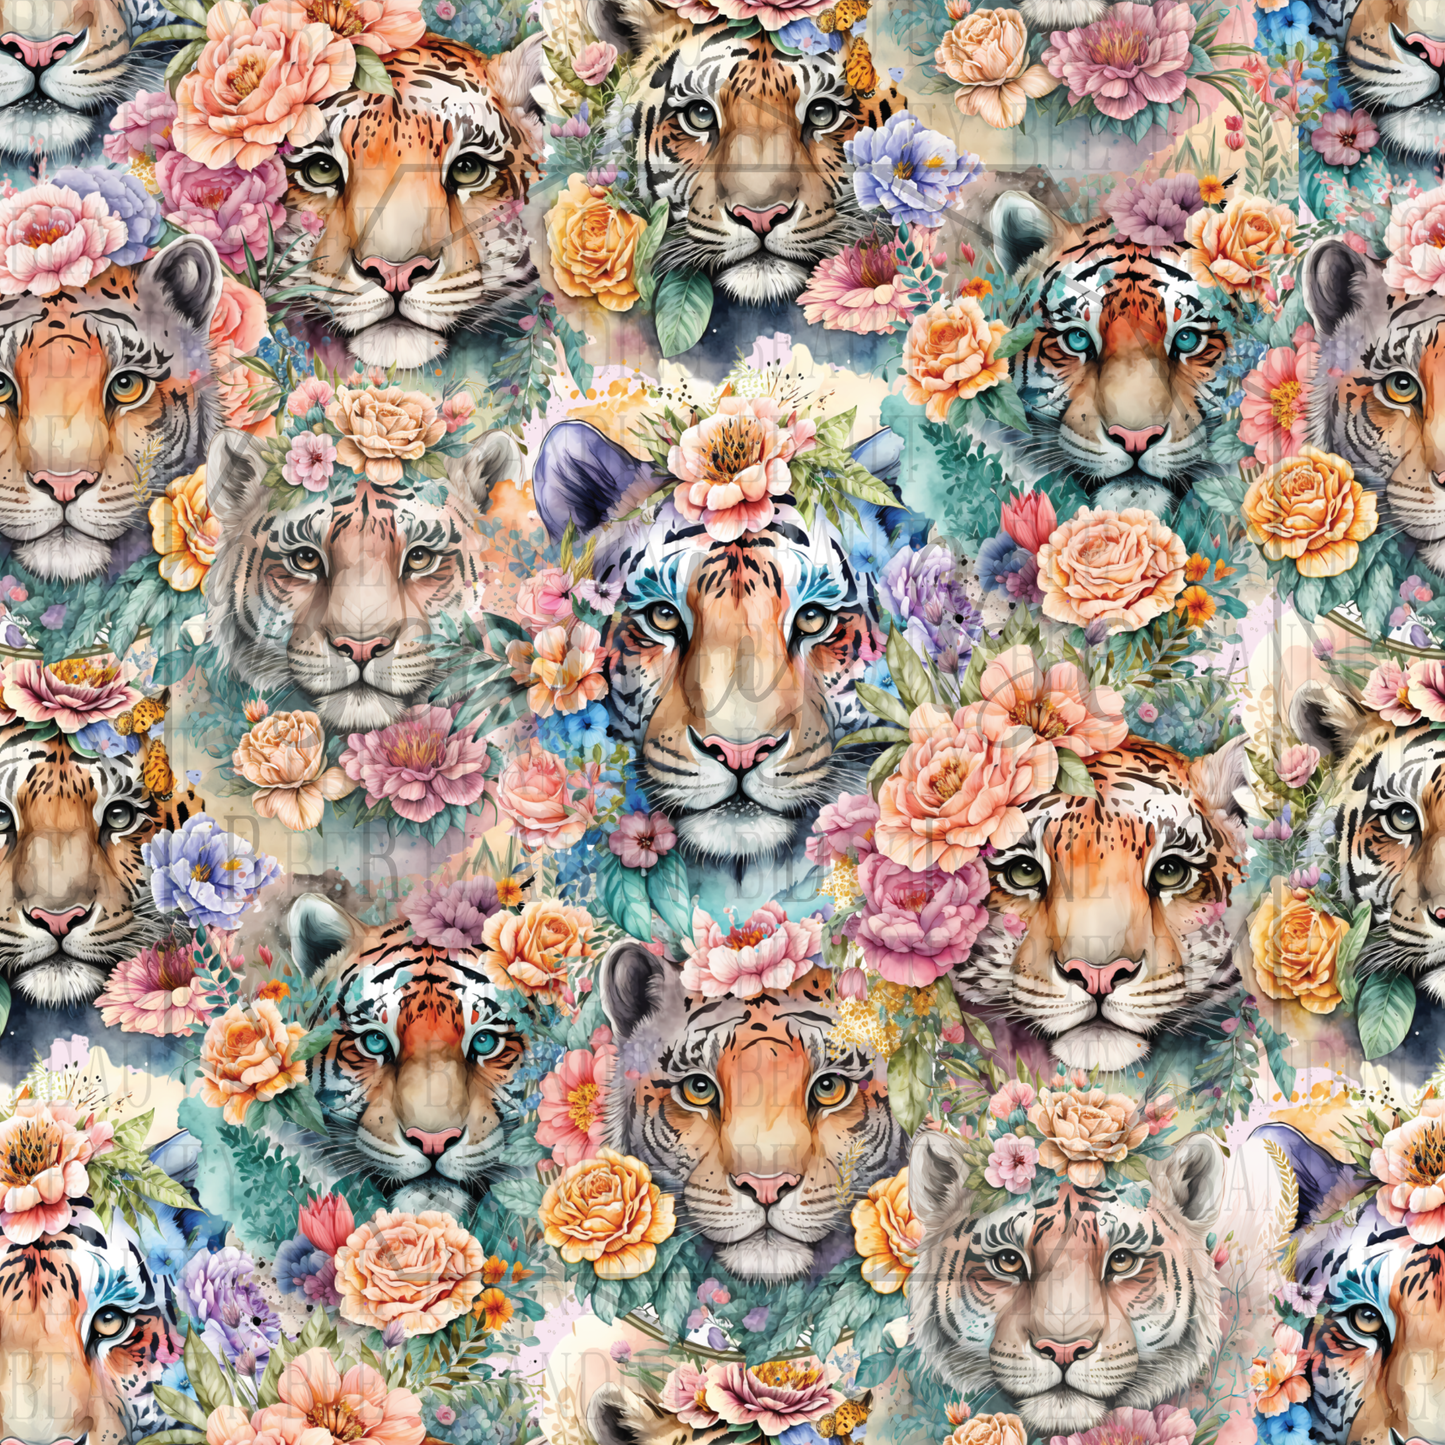 Floral Tigers SEAMLESS PATTERN